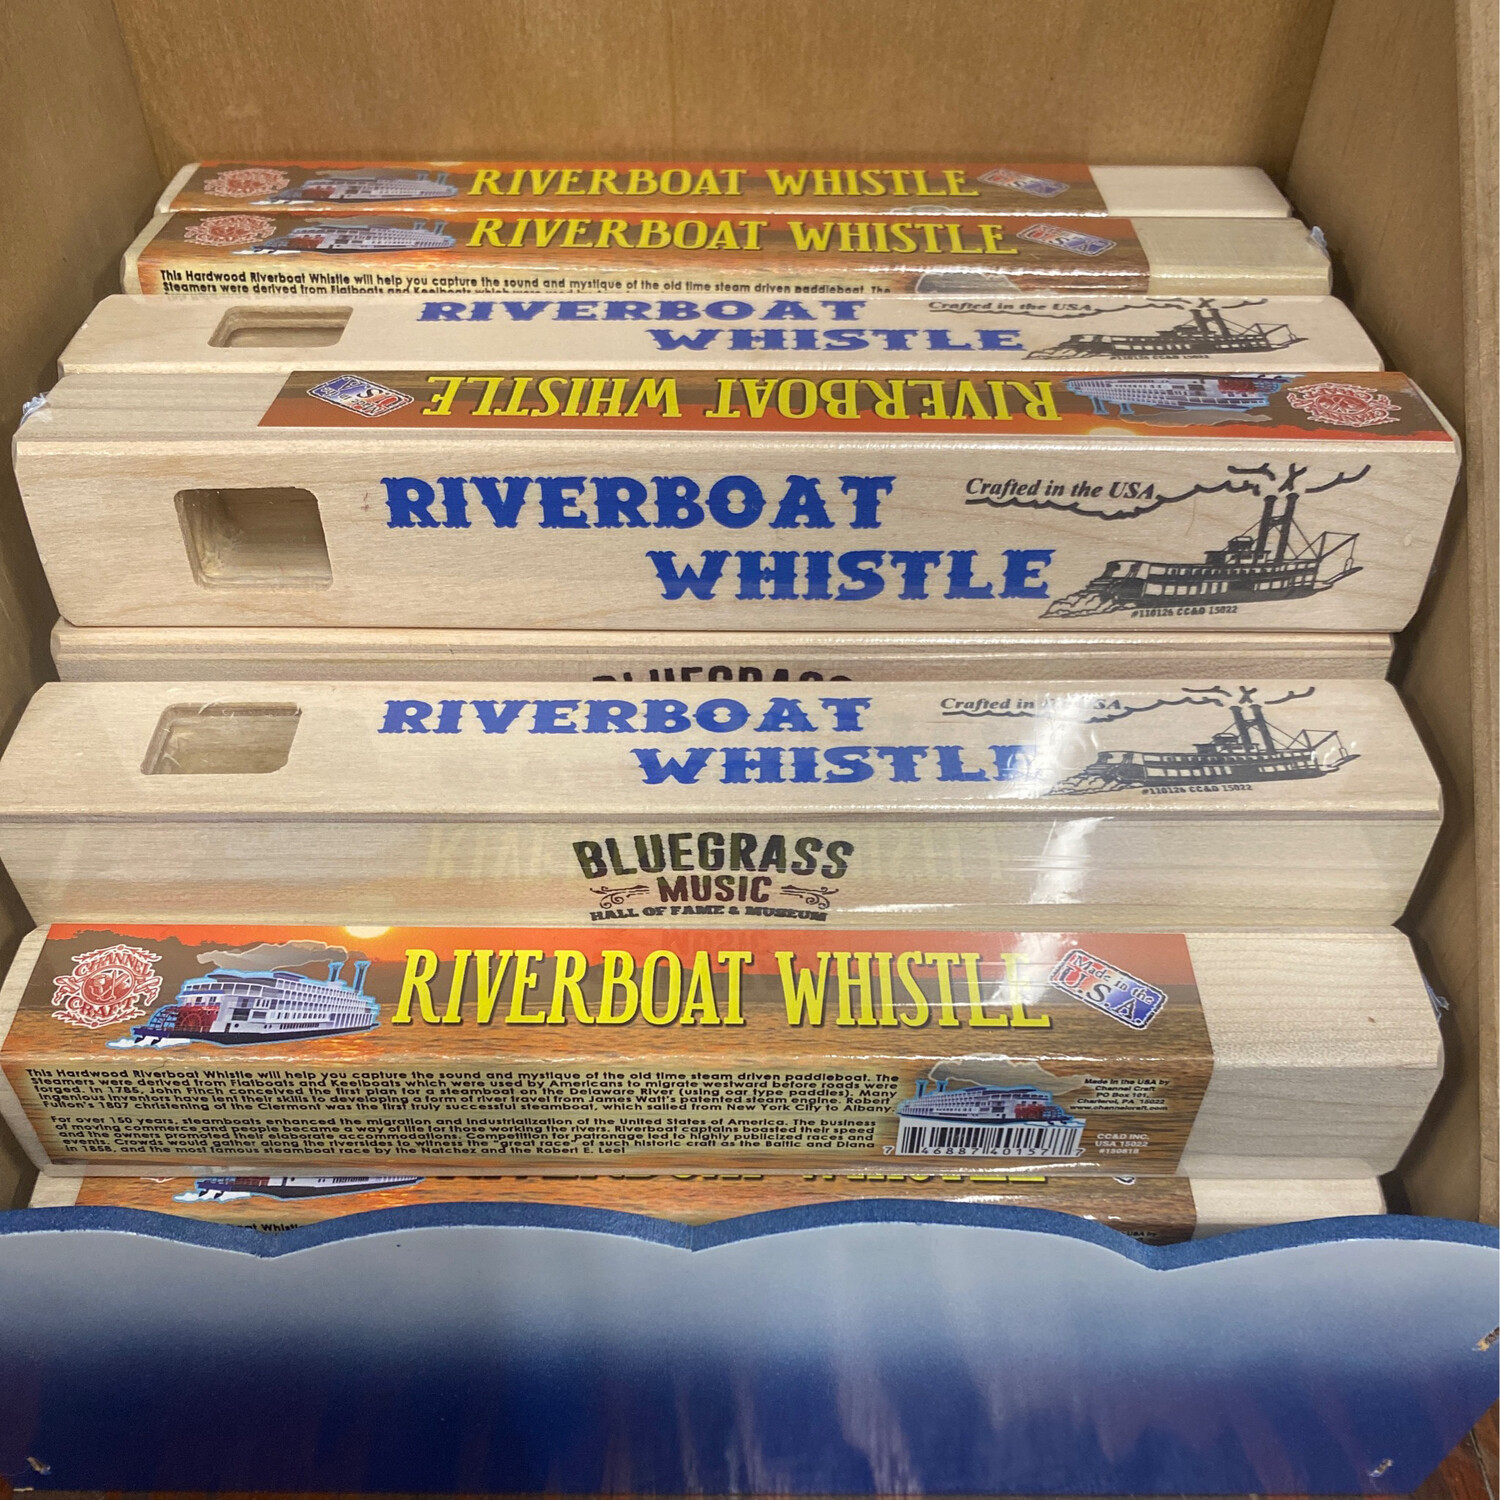 Riverboat Whistle